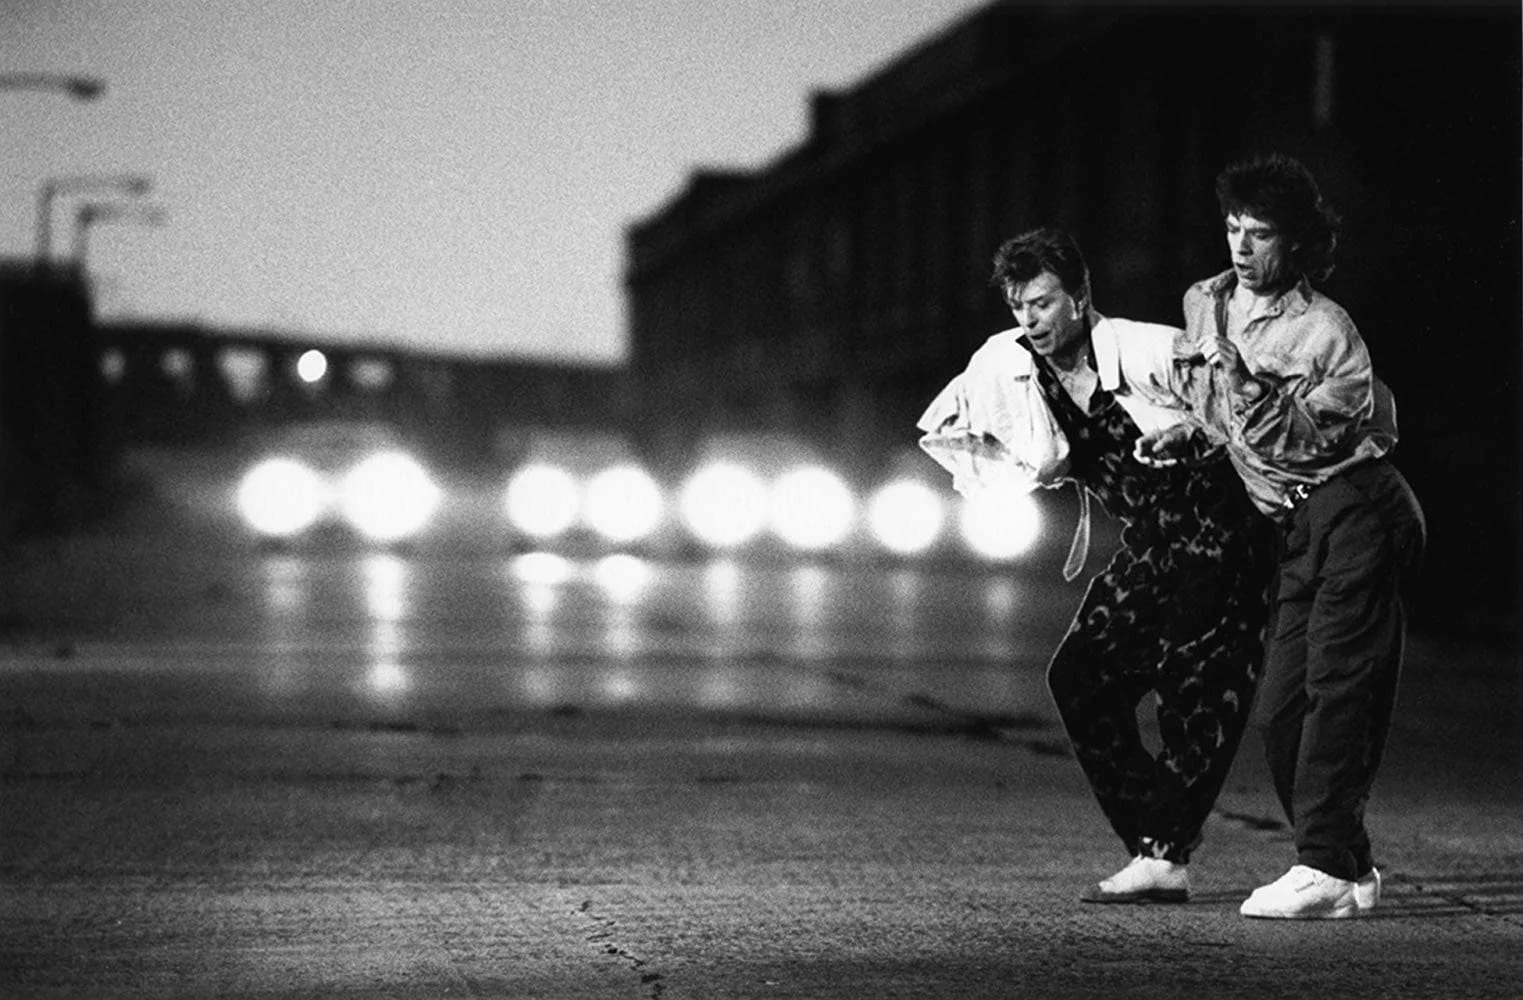 Durante as filmagens do vídeo musical Dancing in the Street (1985). David Bowie e Mick Jagger